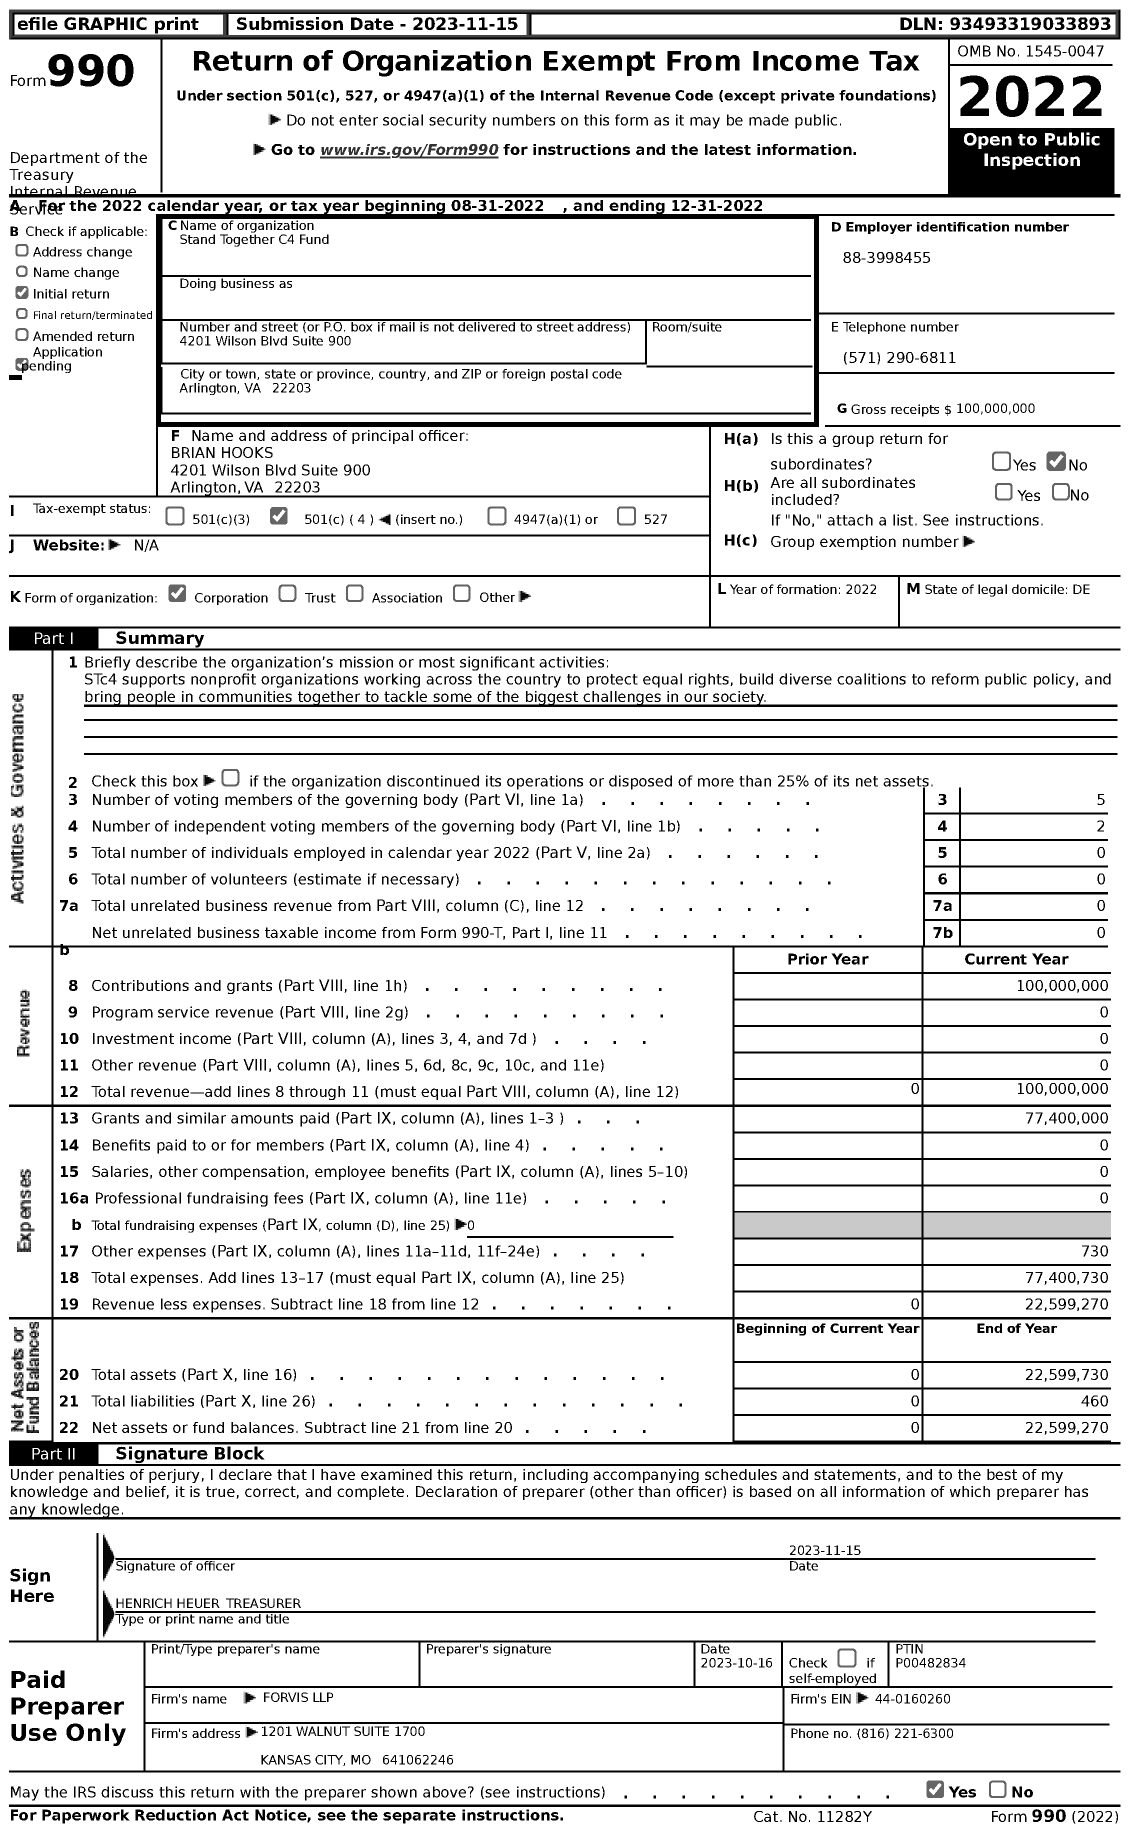 Image of first page of 2022 Form 990 for Stand Together C4 Fund